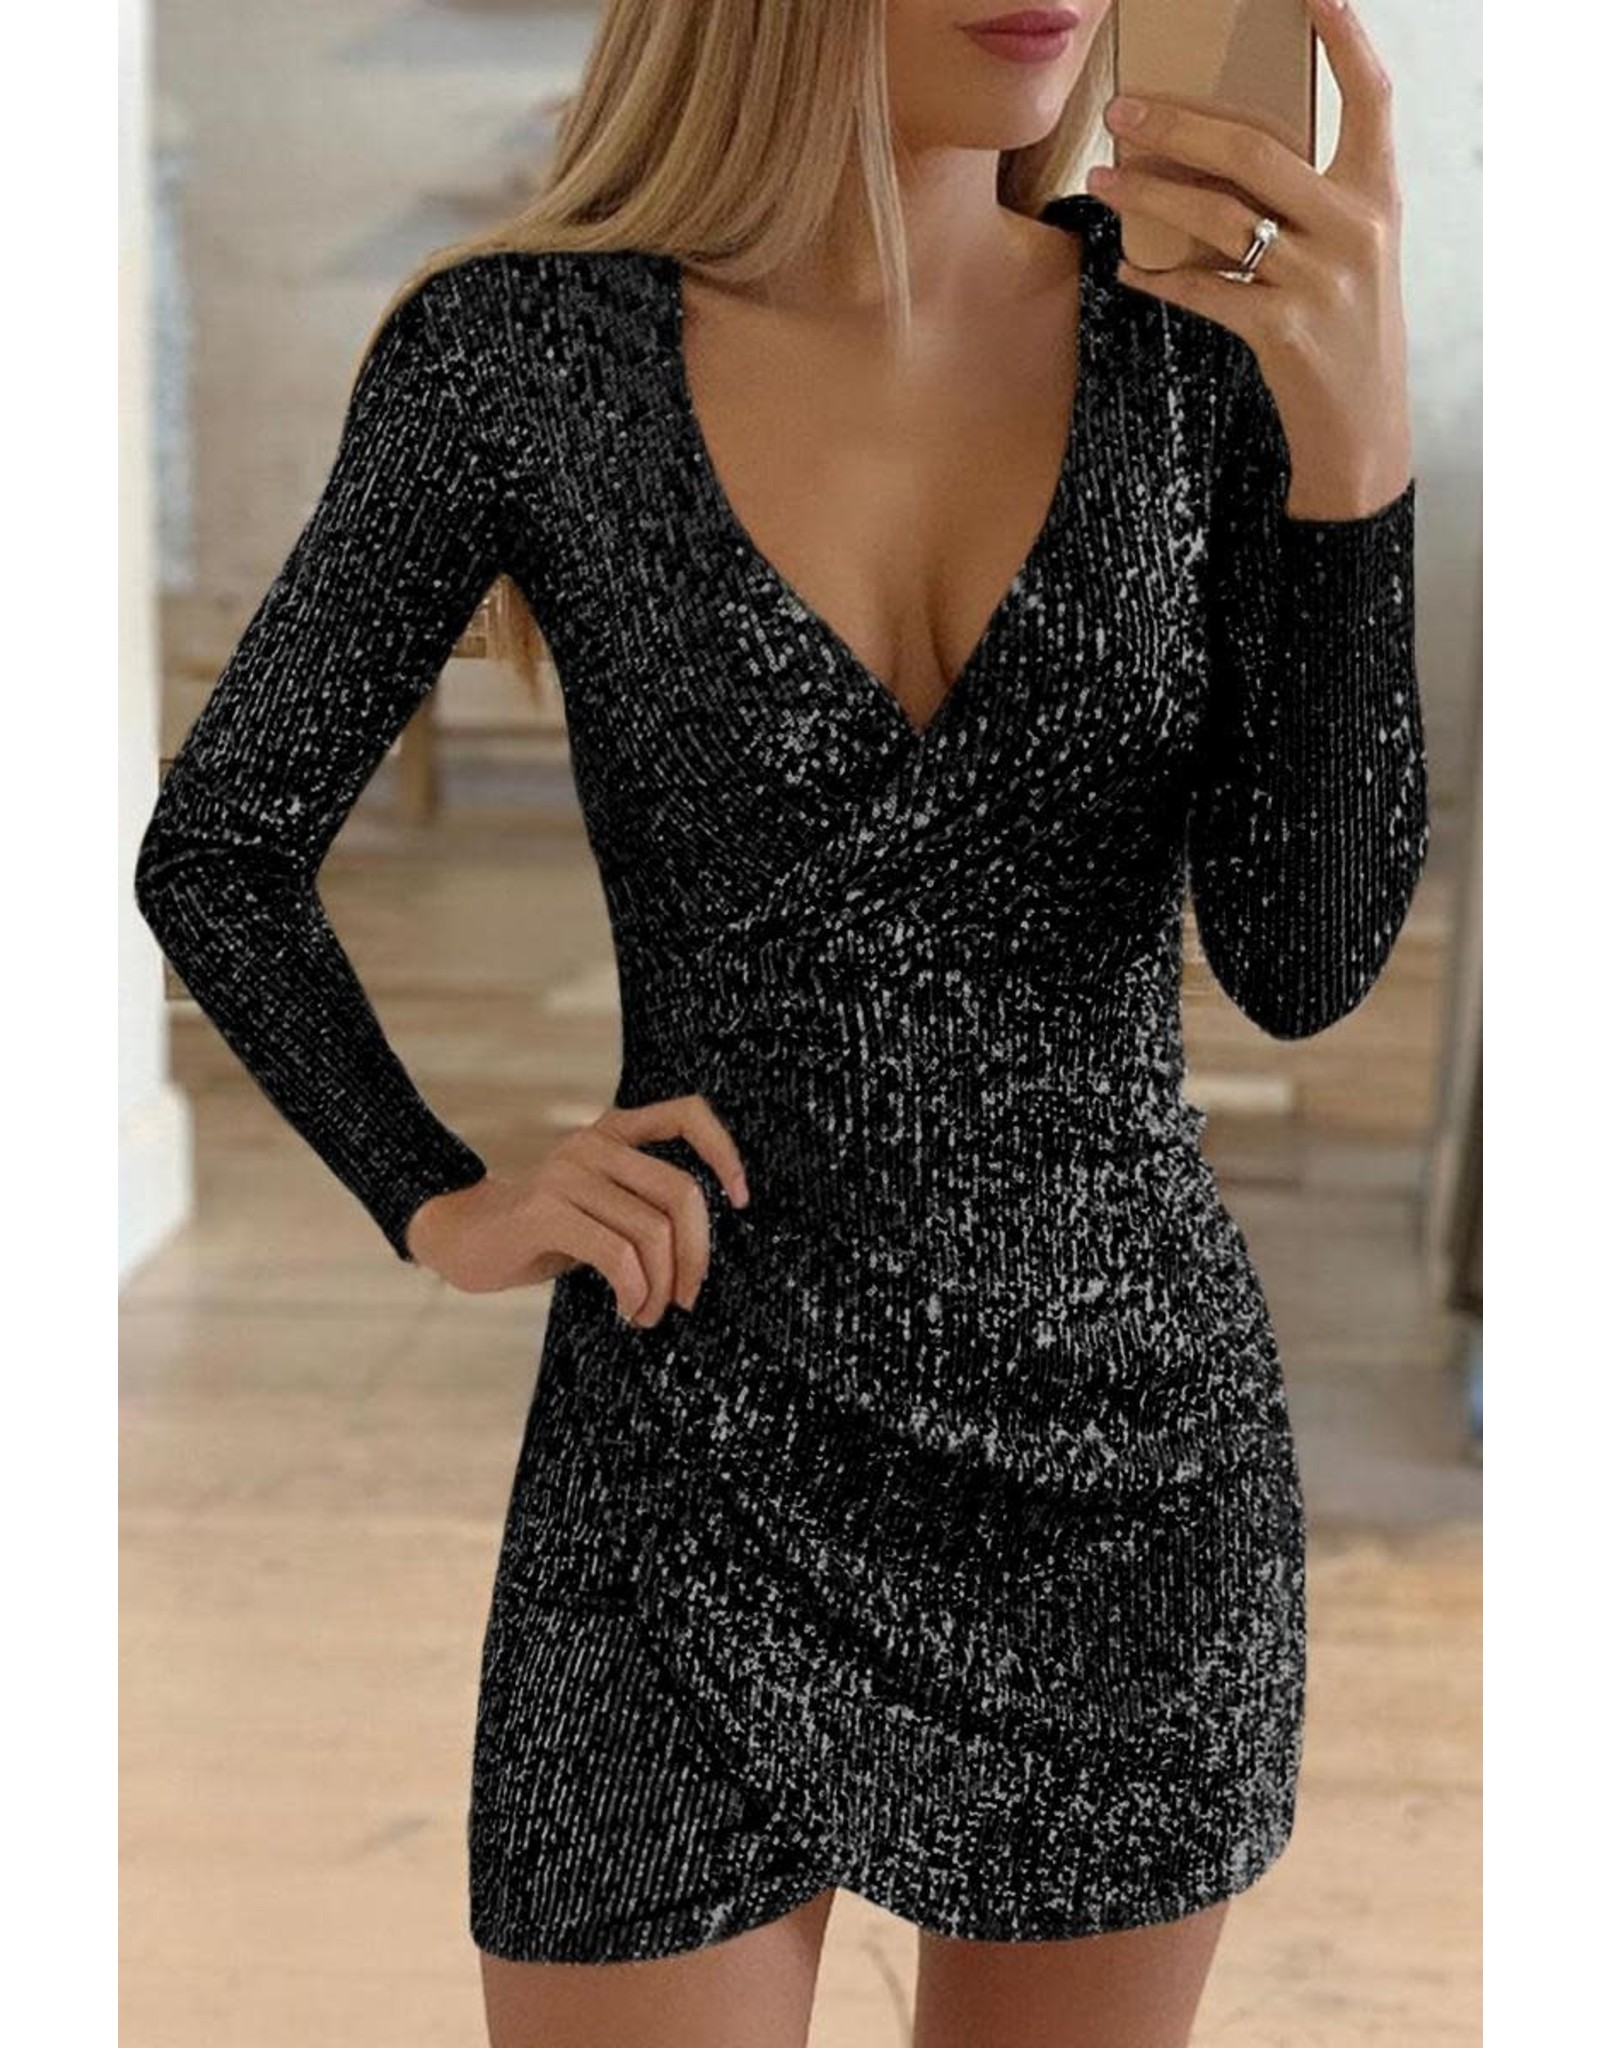 ruched sequin dress